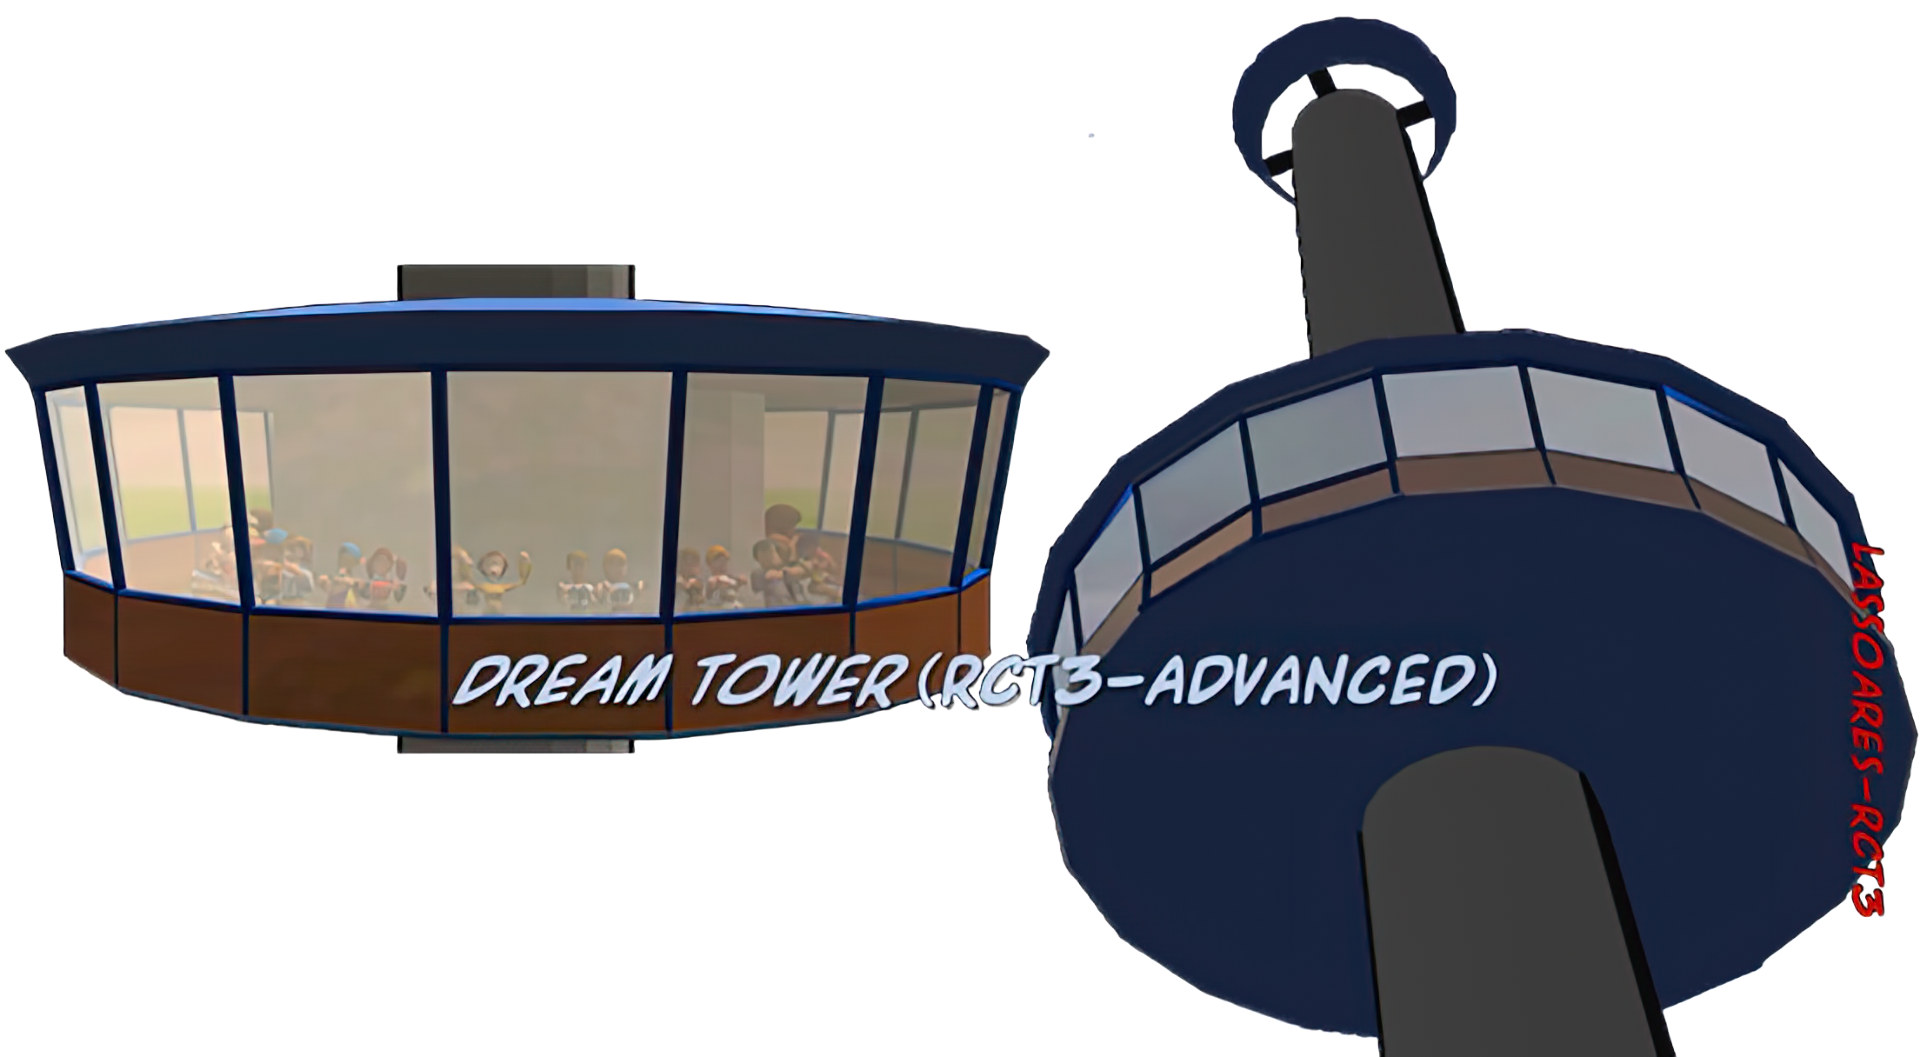 More information about "RCT3-Advanced Dream Tower CFR"